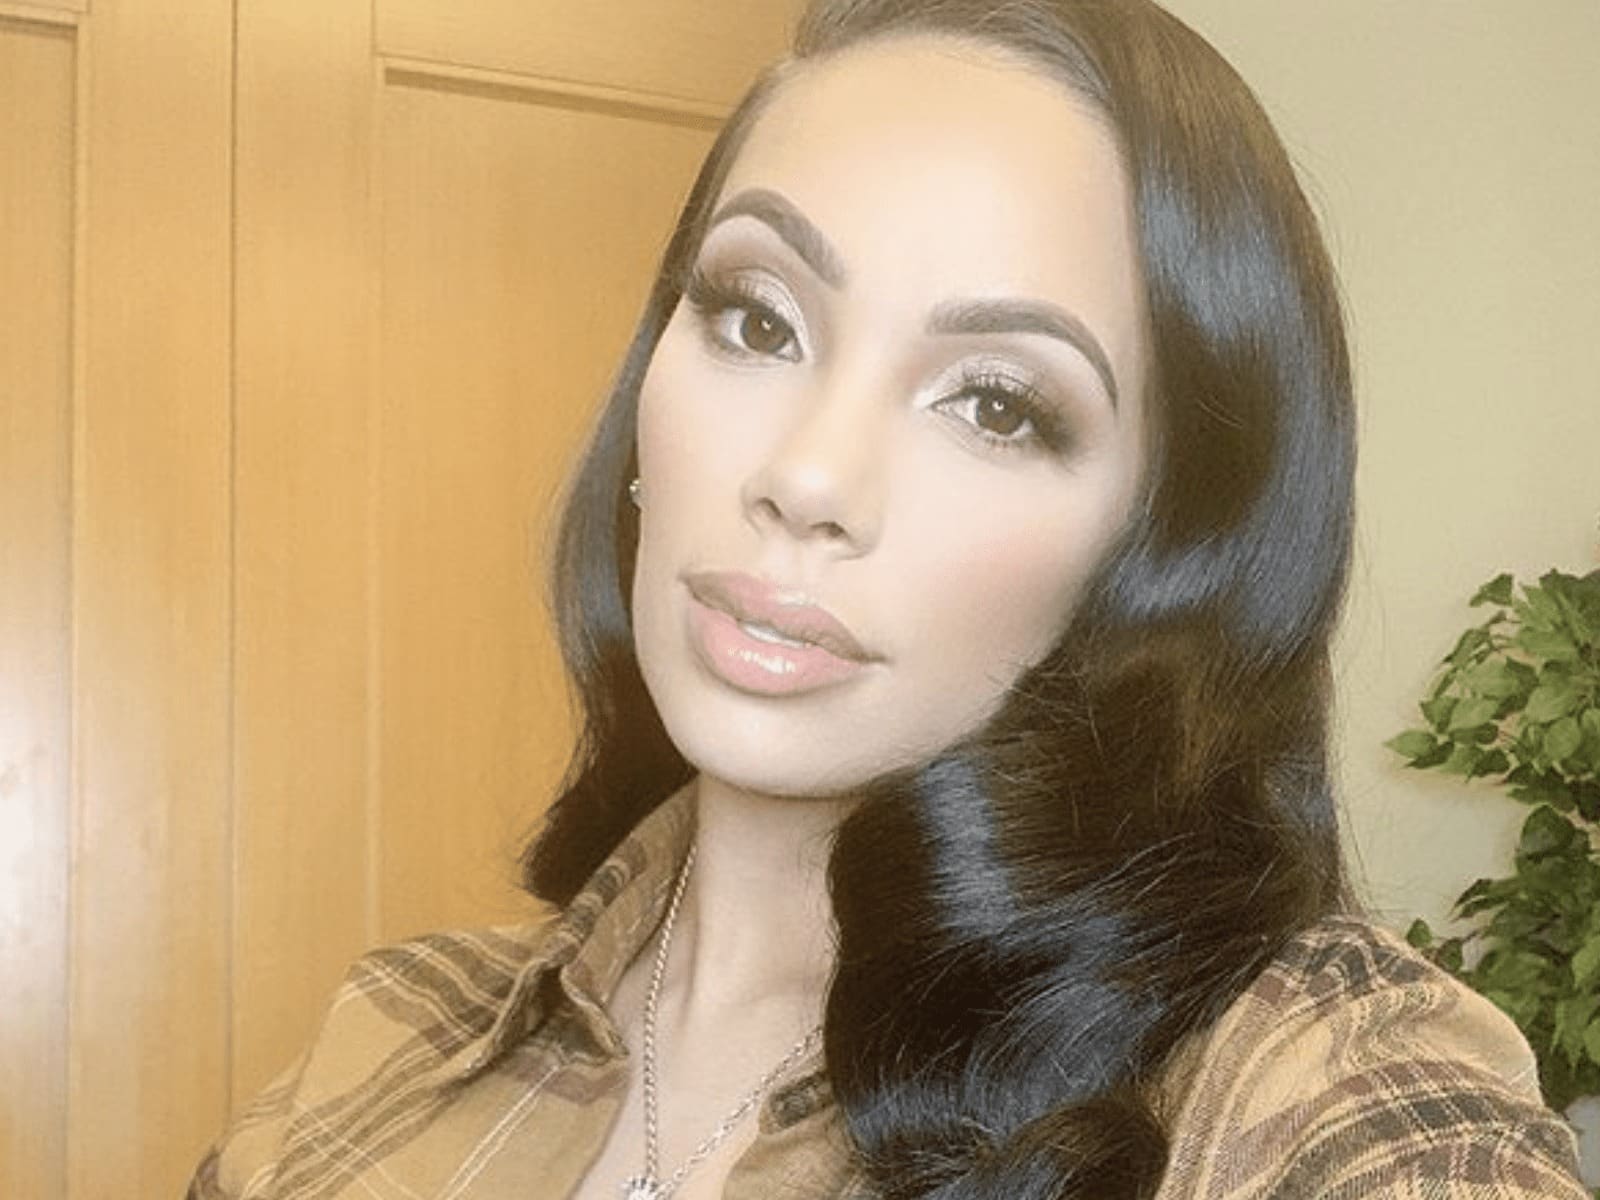 Erica Mena Drops Her Clothes And Breaks The Internet For Her 33rd Birthday - See Her Pics Here